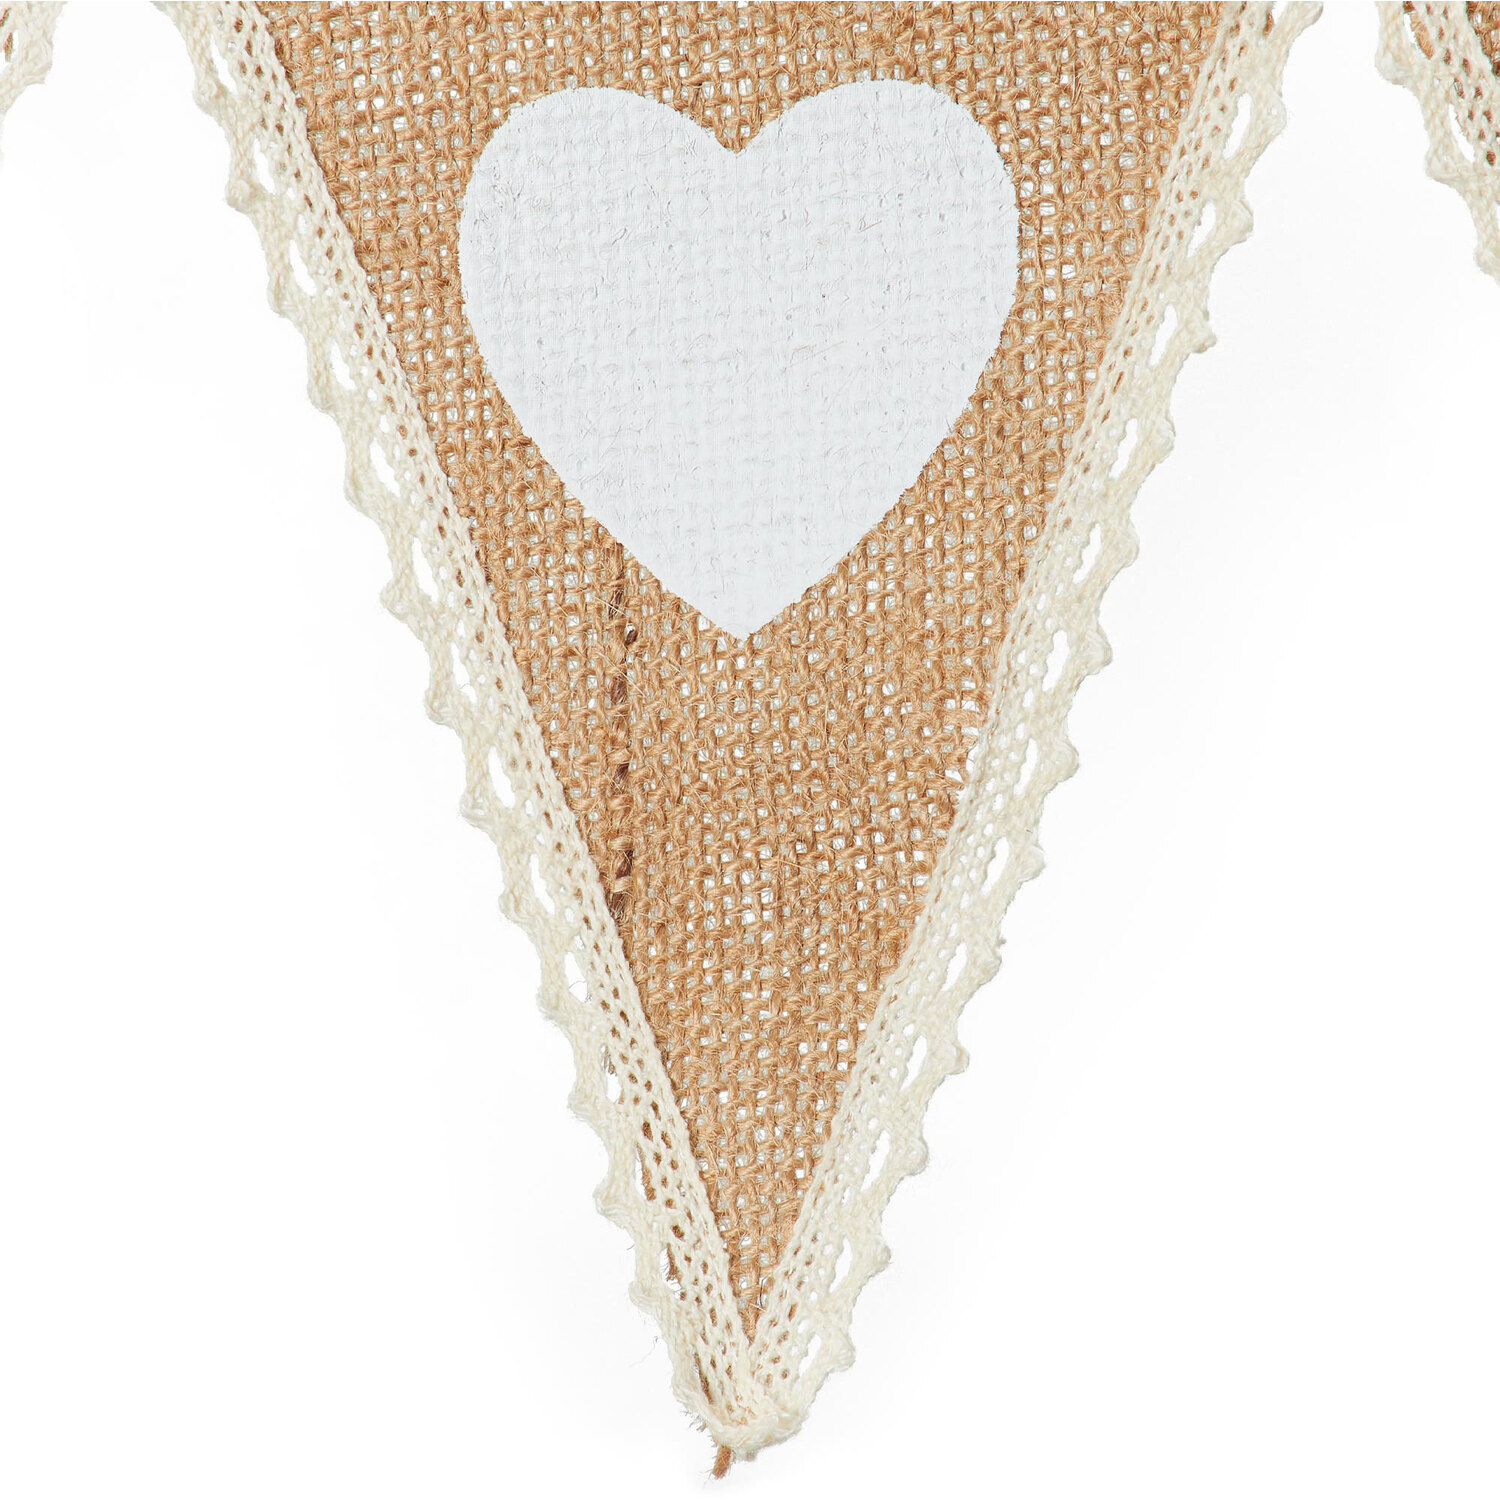 Hessian & Lace Heart Bunting - Natural Image 2